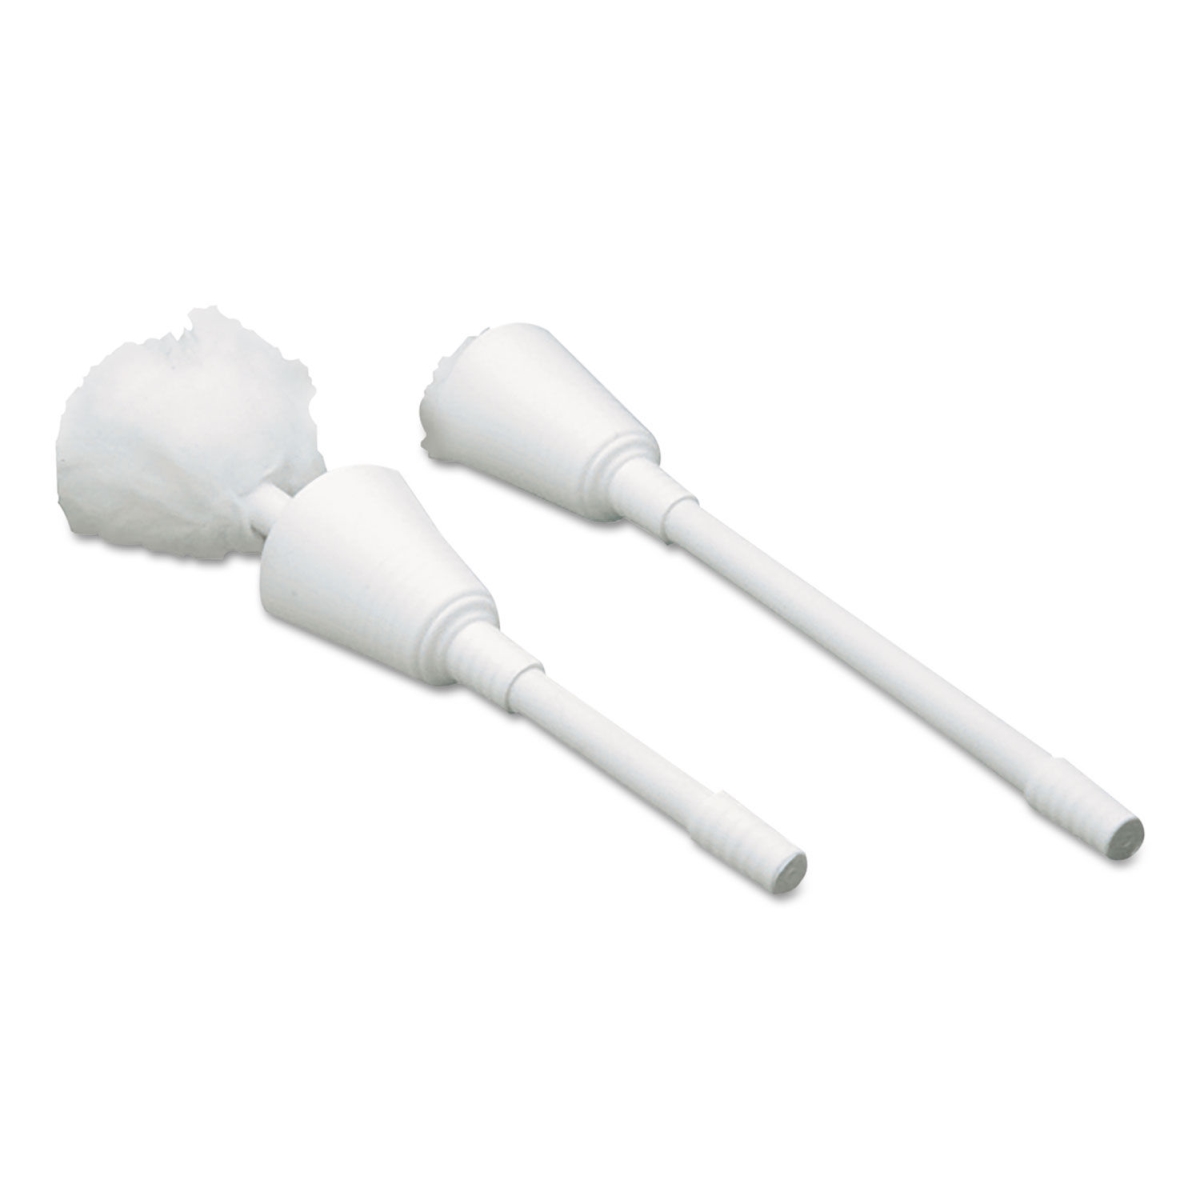 Picture of Impact Product IMP3600 13 x 5.5 in. Cone Toilet Bowl Handle Mop, White